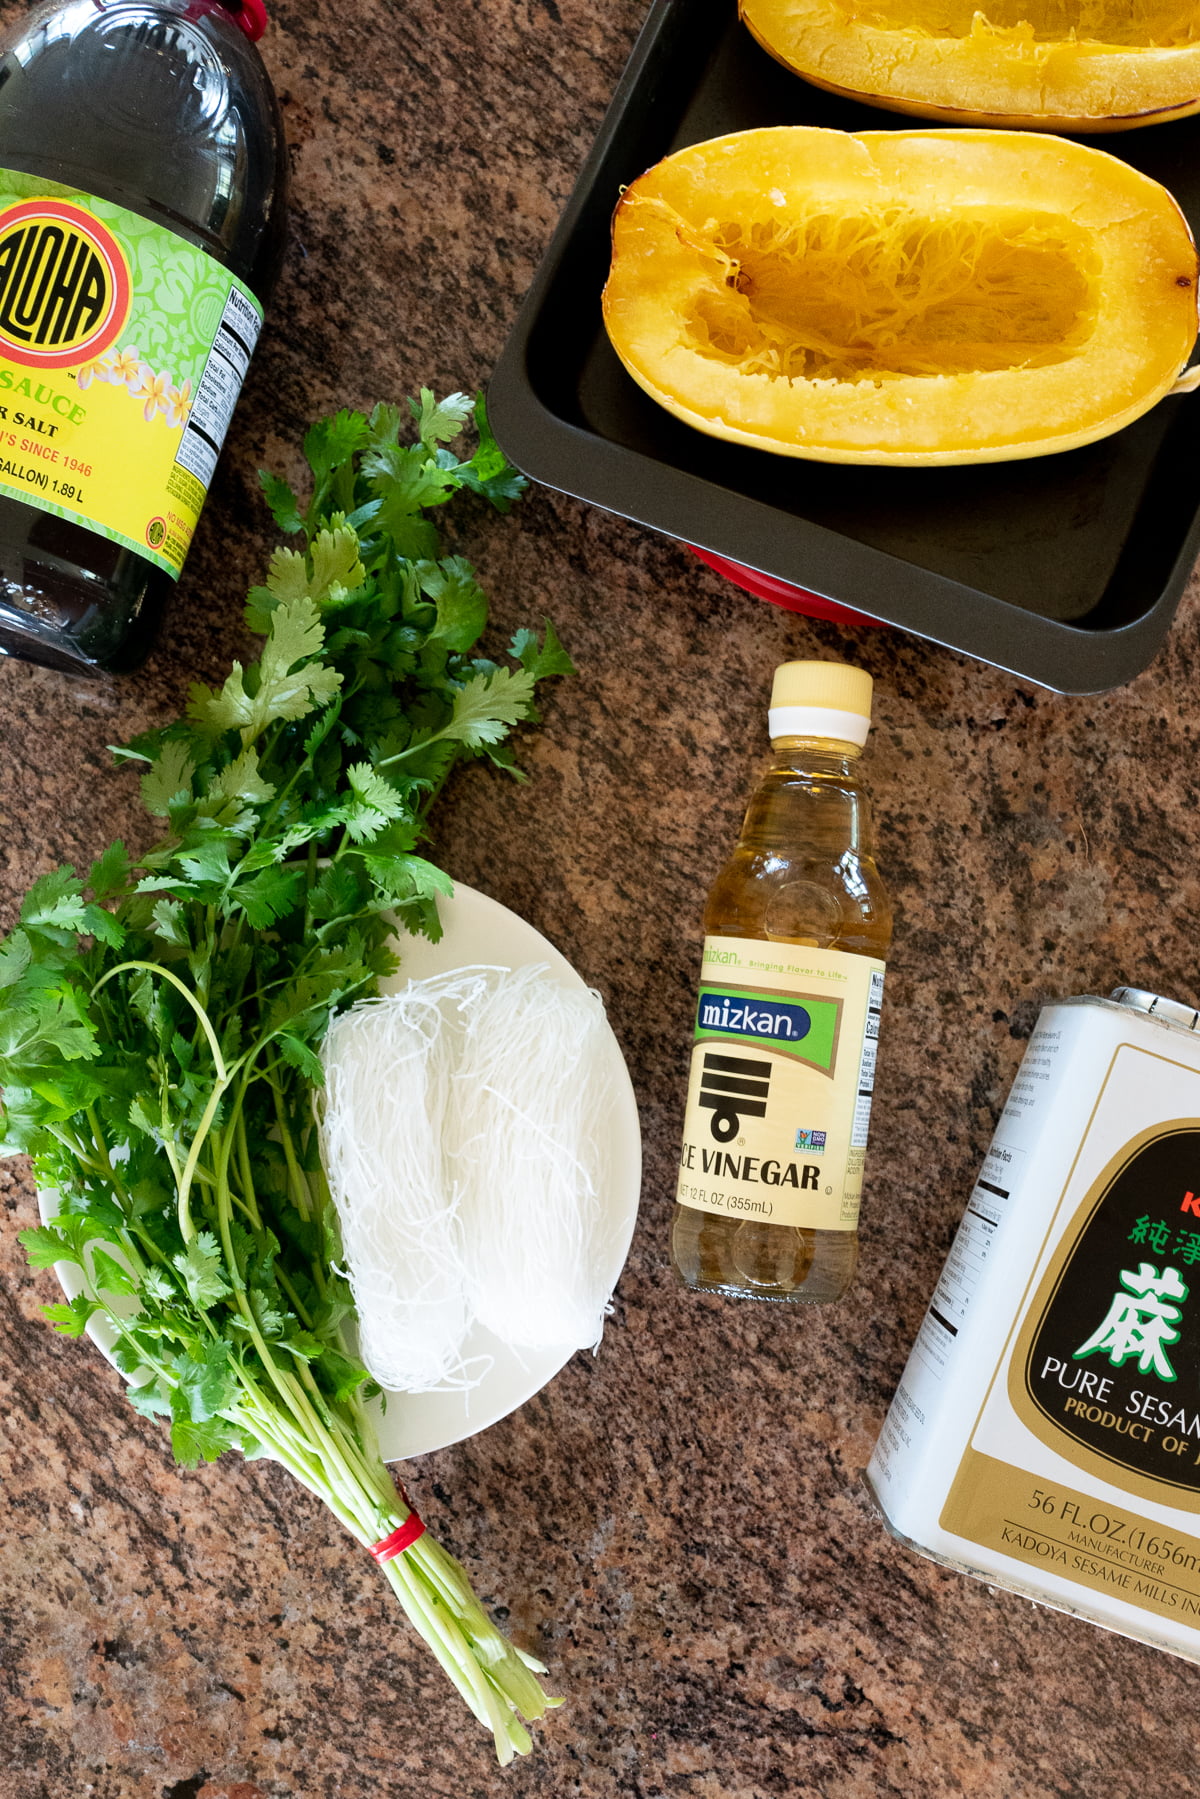 Ingredients for Spaghetti Squash and Glass Noodle Salad (spaghetti squash, glass noodles, cilantro, soy sauce, Maggie, rice vinegar, sesame oil, sugar, and salt).